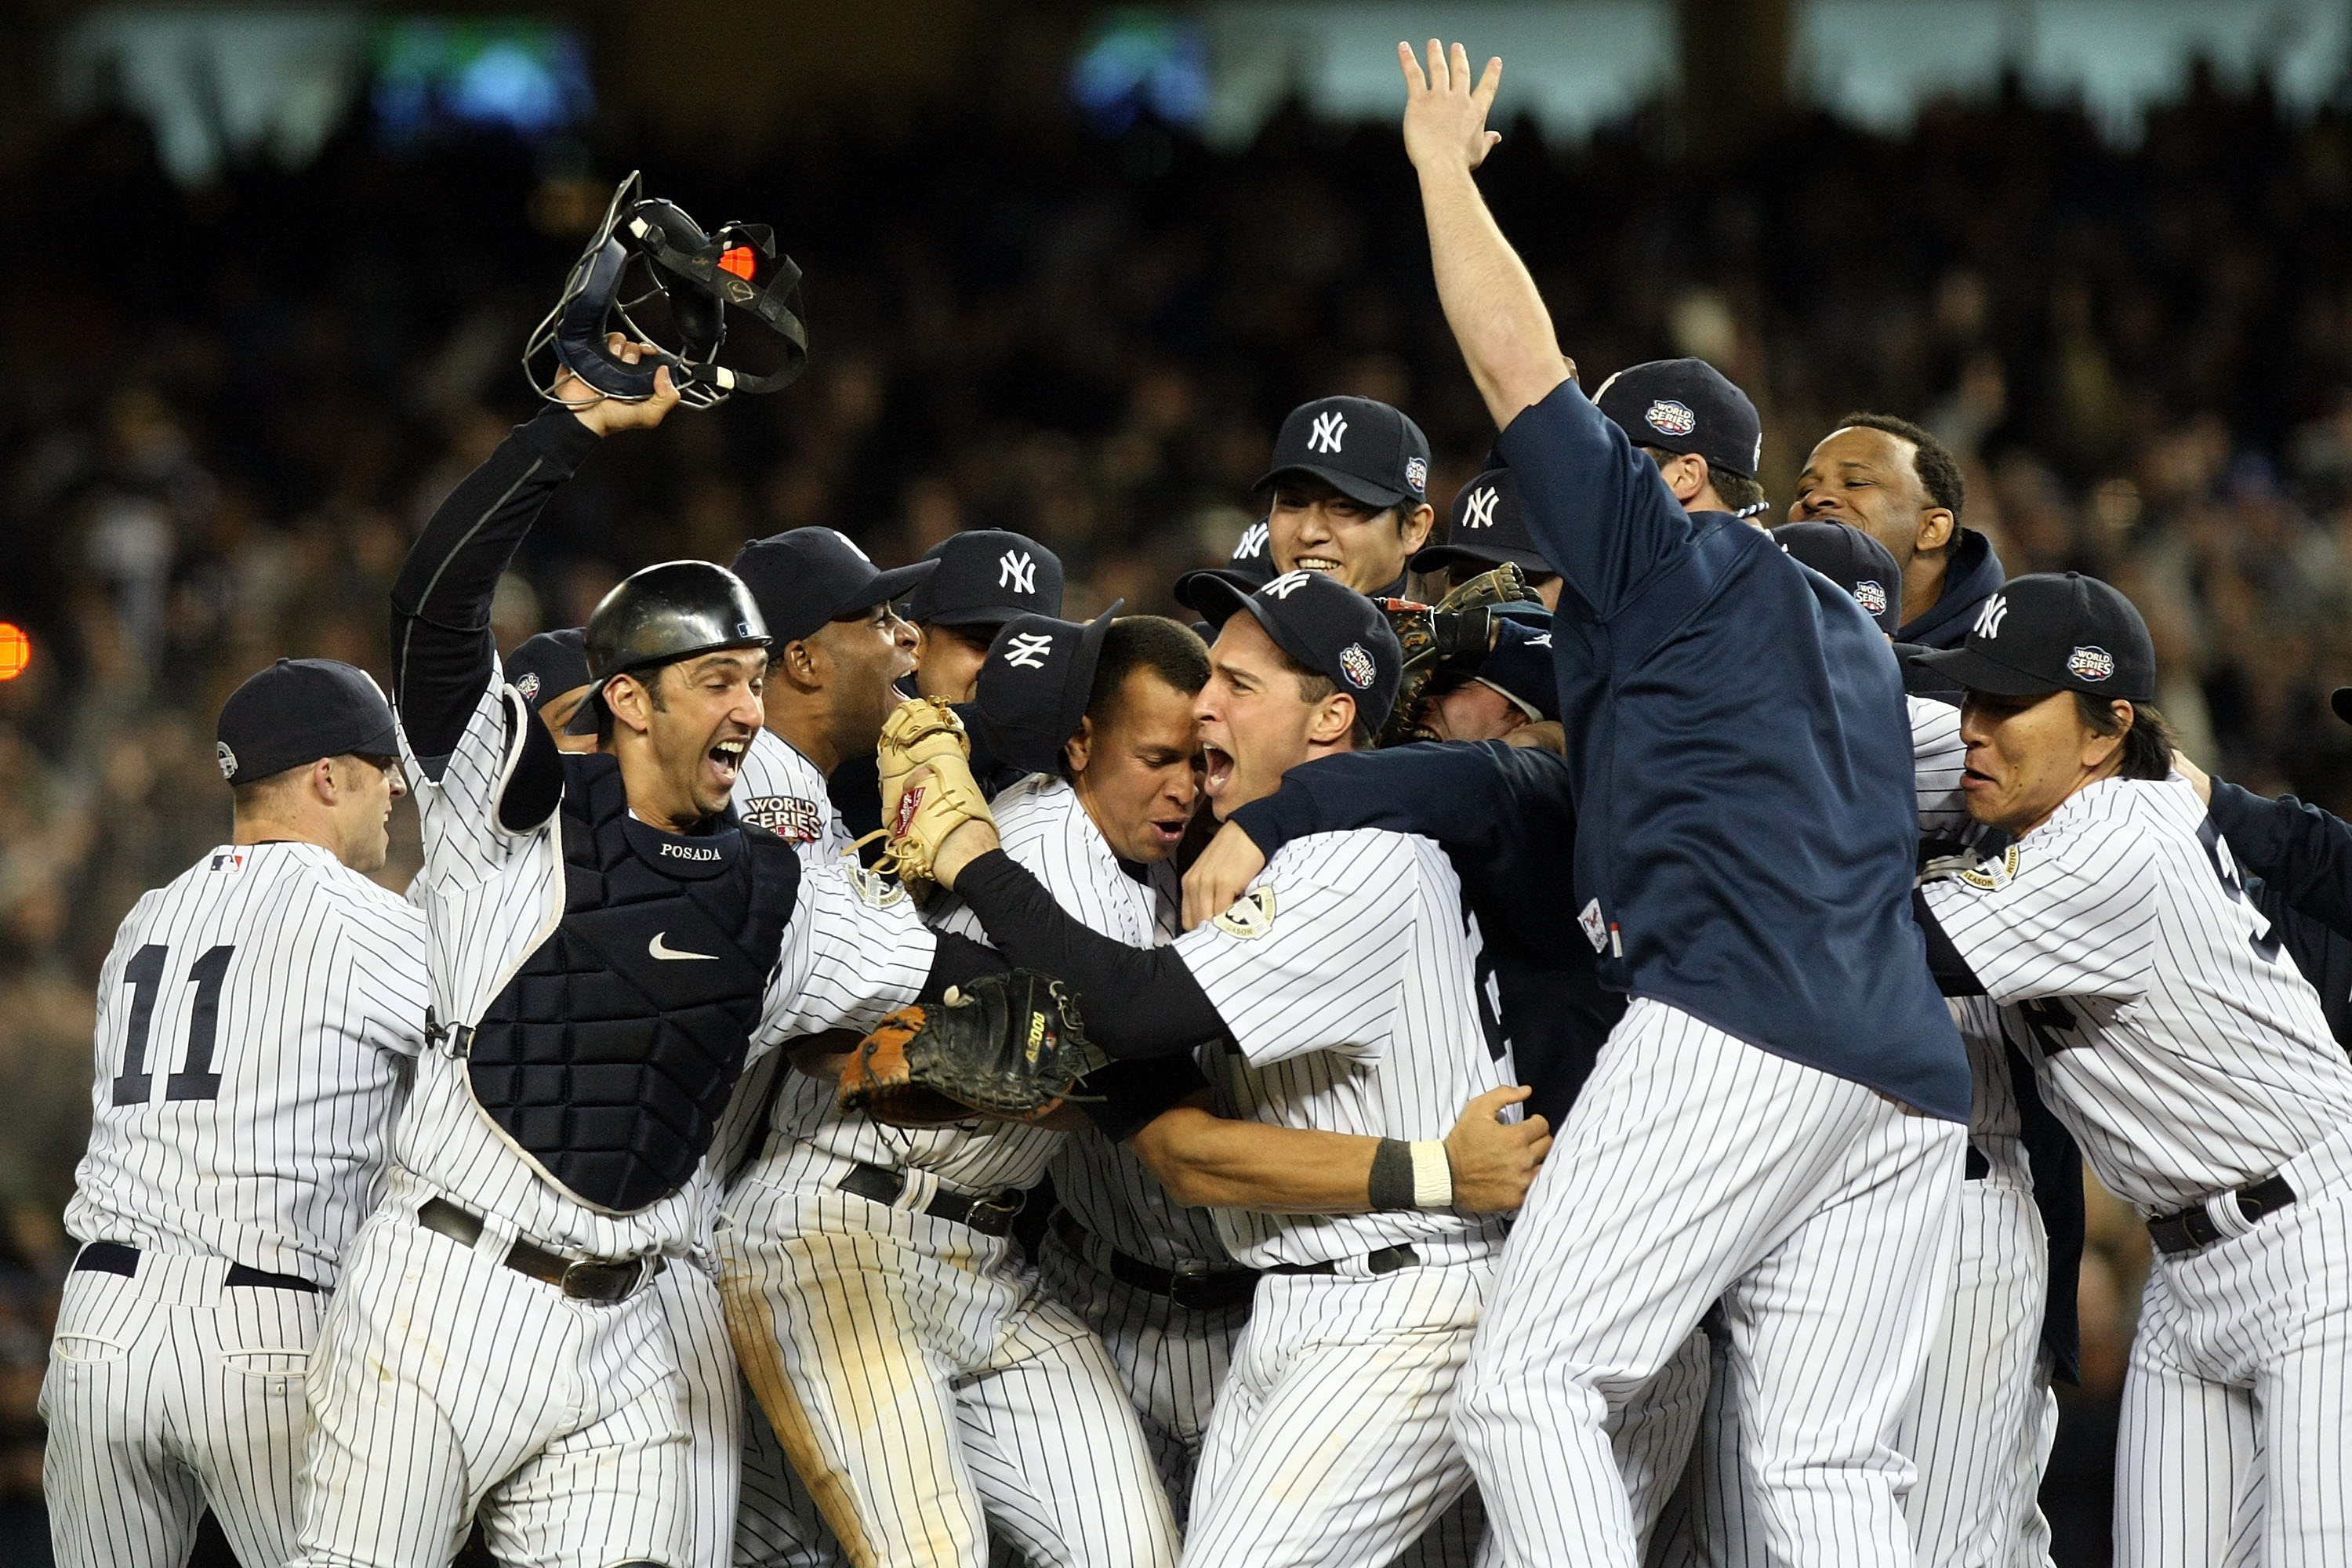 Nov. 13, 2008: When the Yankees brought Nick Swisher and sunshine